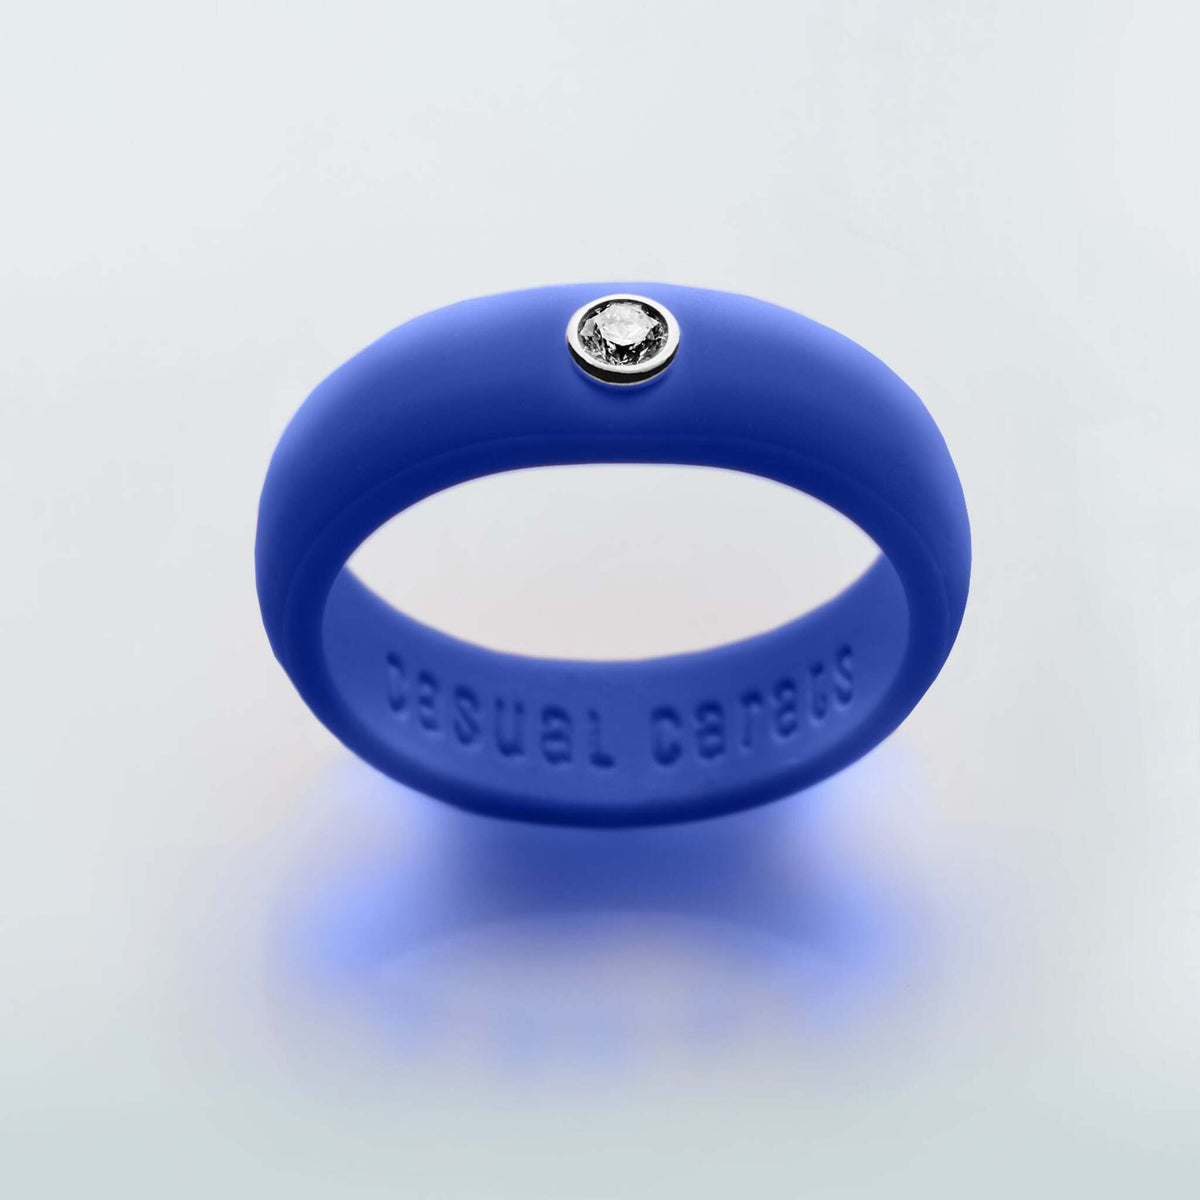 Casual Carats - Classic Collection - Regal Blue Silicone Ring with Diamond - Set in White or Yellow 14K Gold